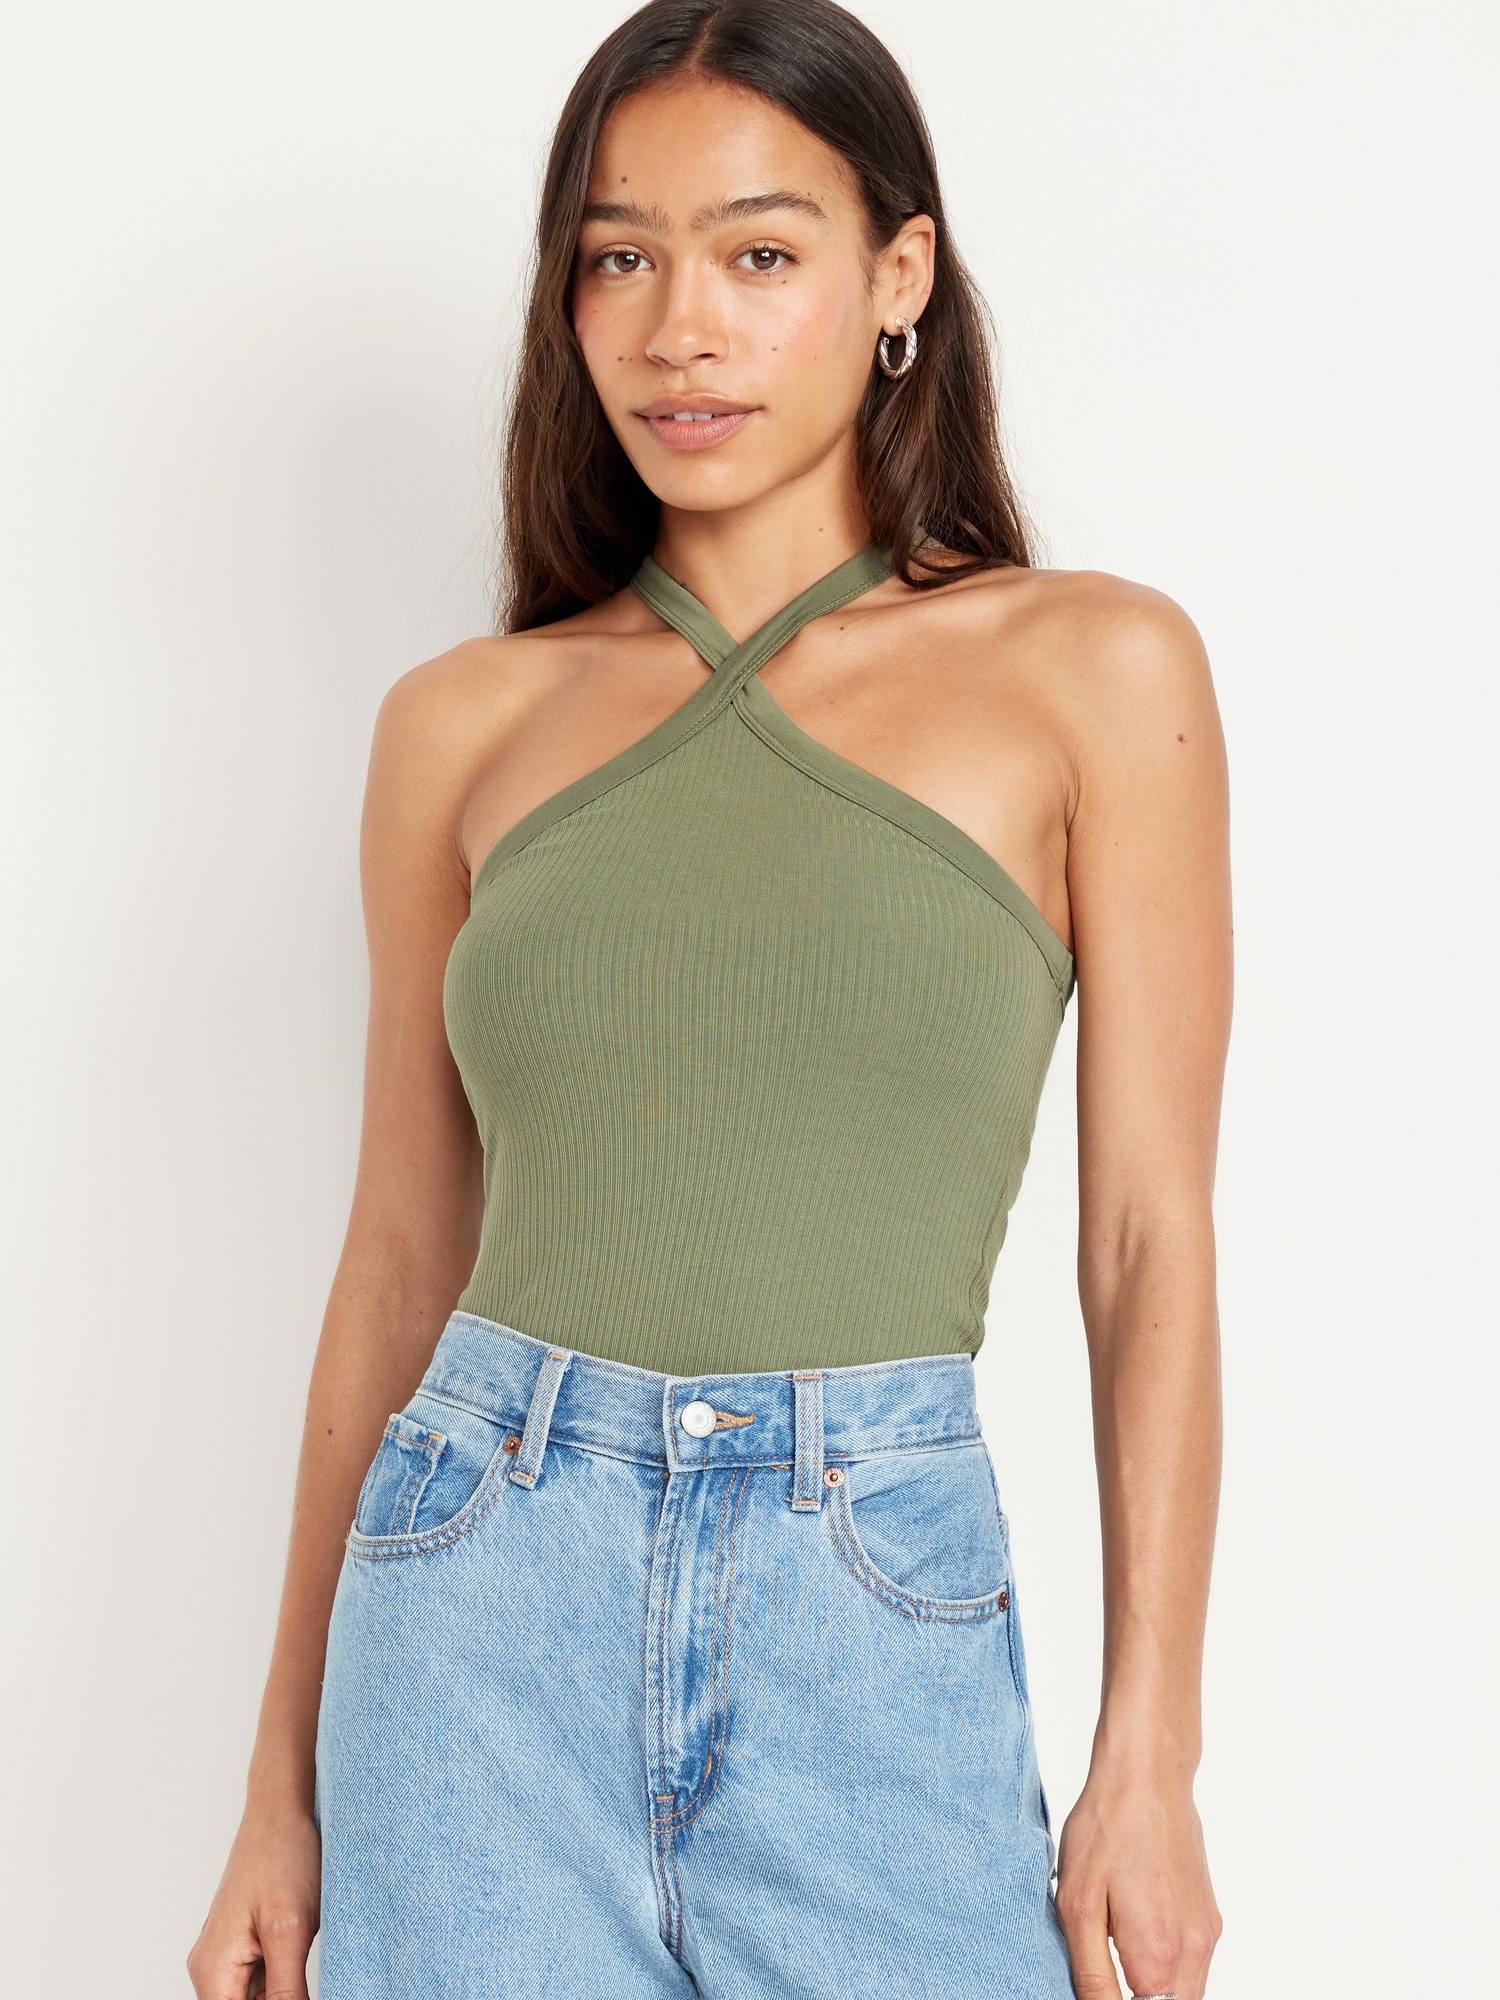 Fitted Halter Top Hot Deal